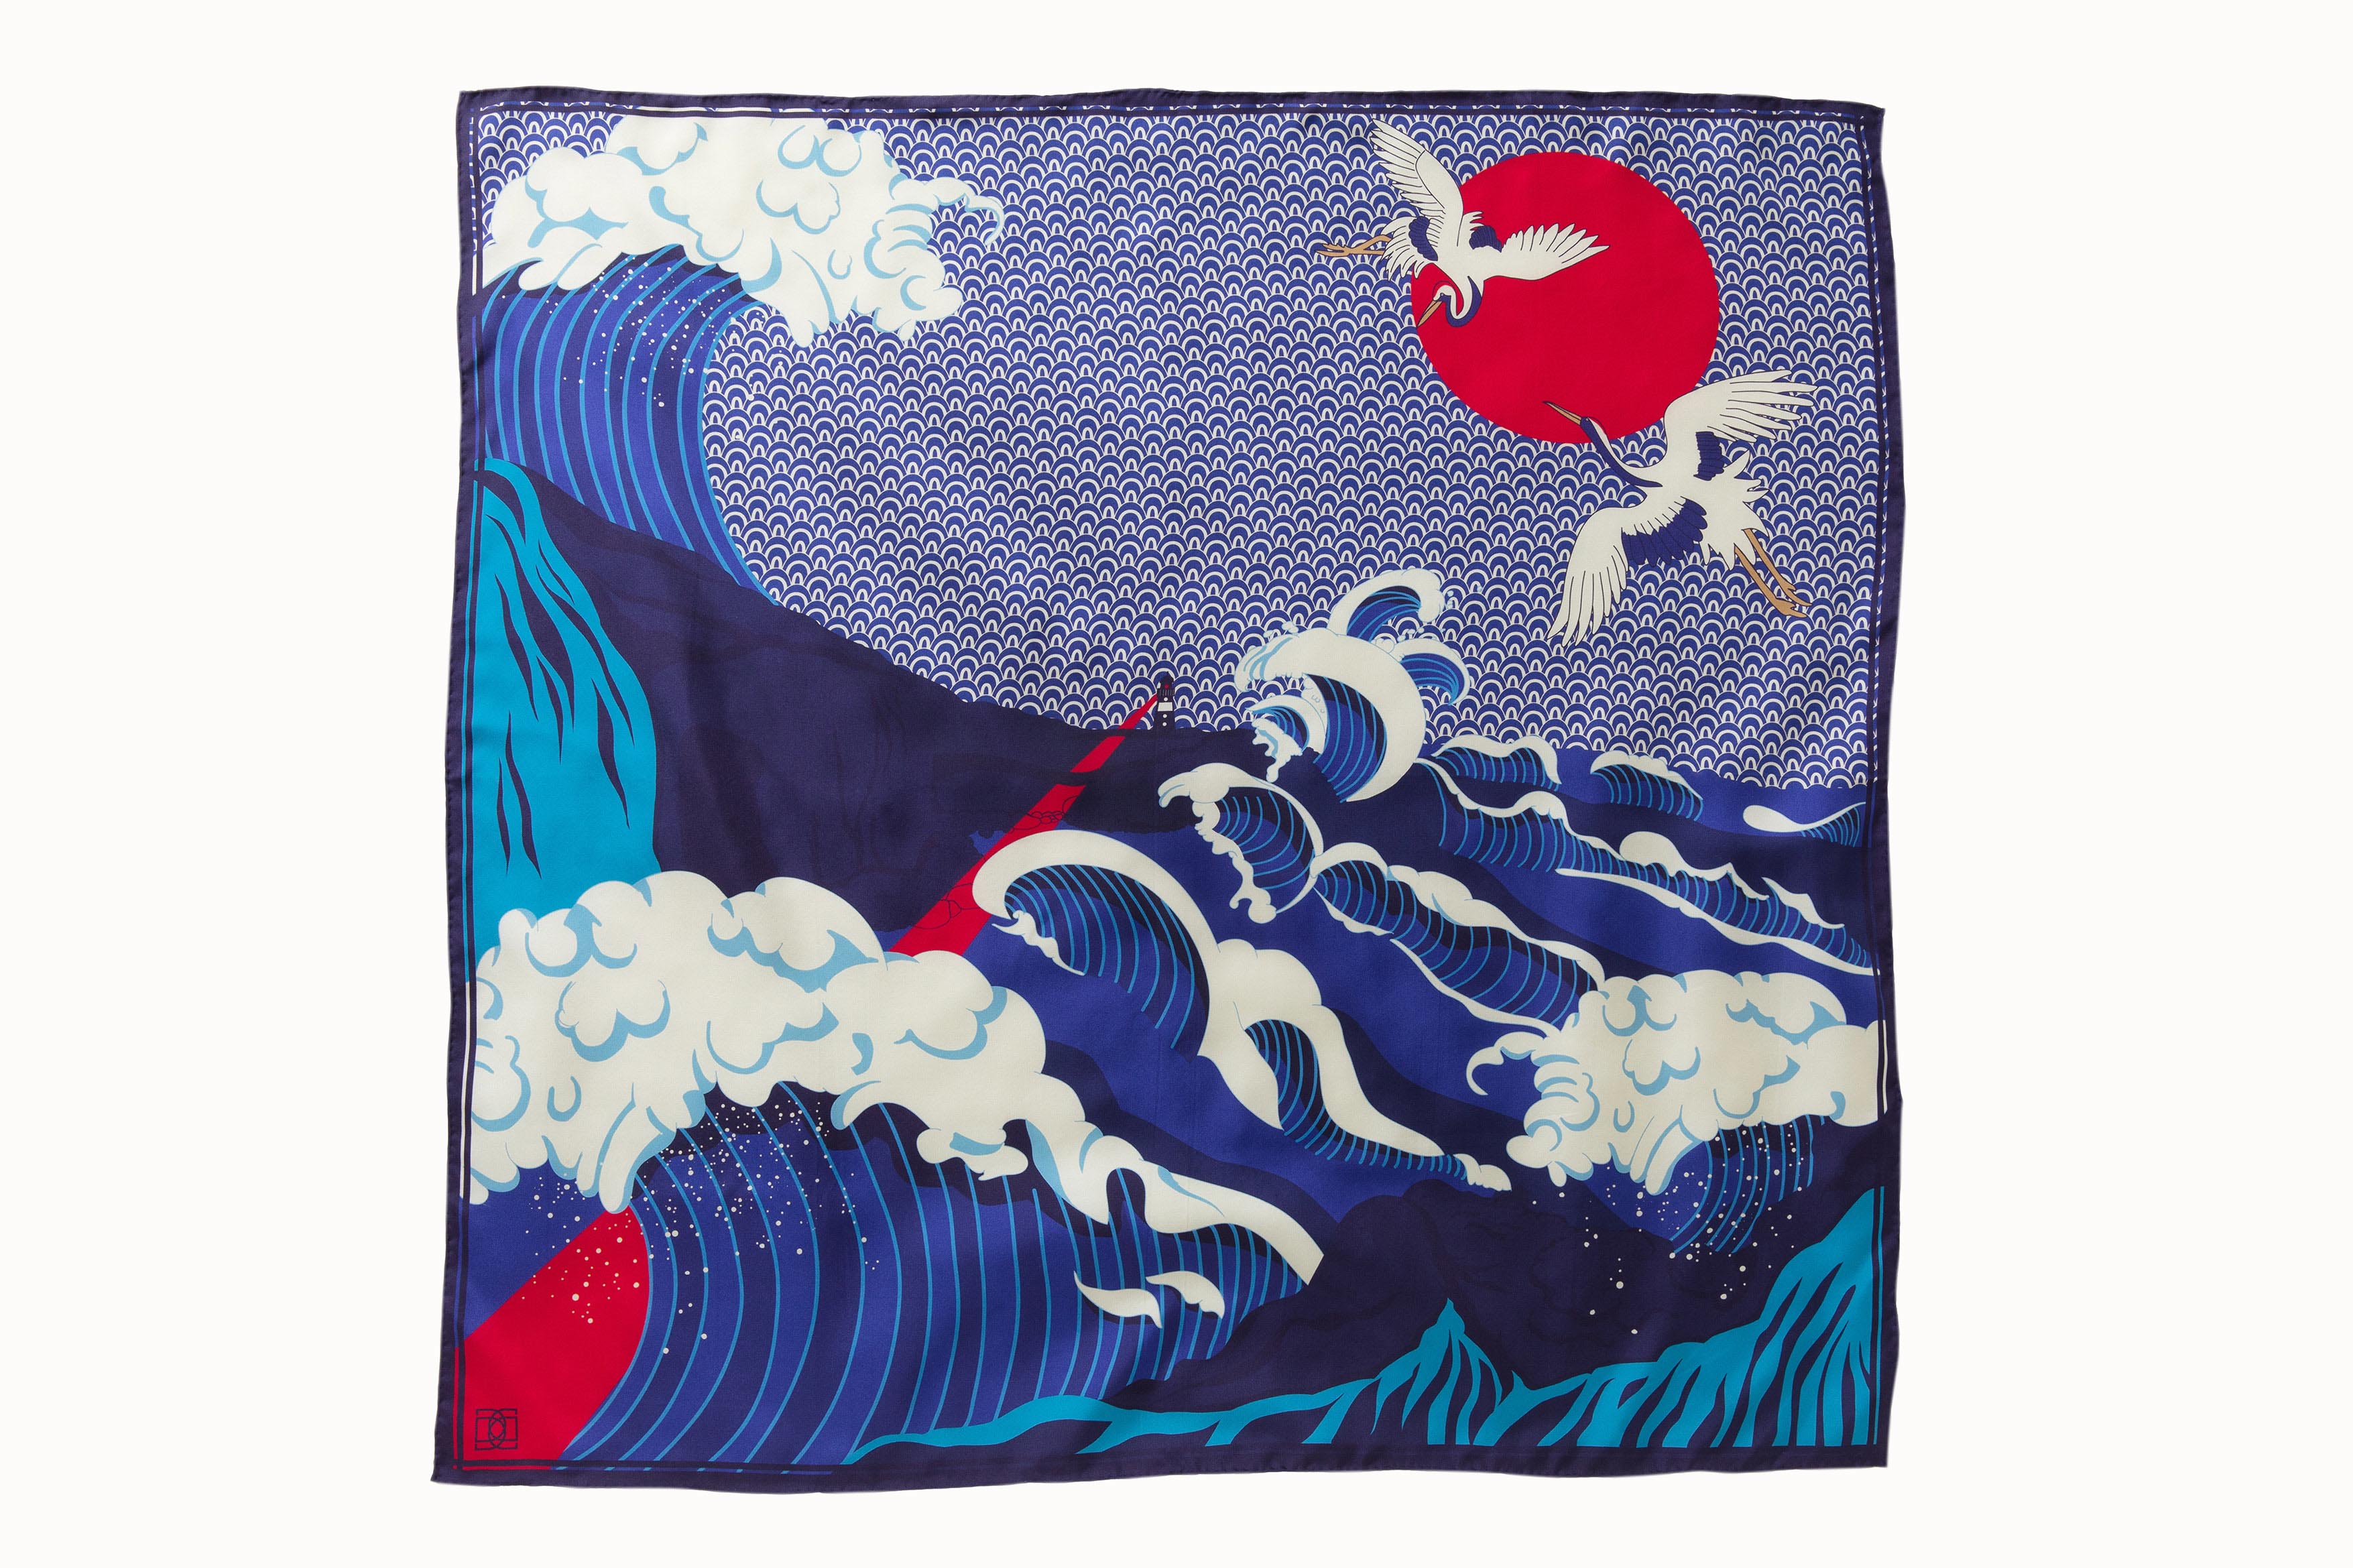 Flatlay image of 100% silk square scarf featuring an illustration of large crashing waves against a blue and white patterned background with small lighthouse and two cranes flying in front of the moon. Colors include various shades of blue, from deep navy to royal to French blue, as well as warm red and cream.